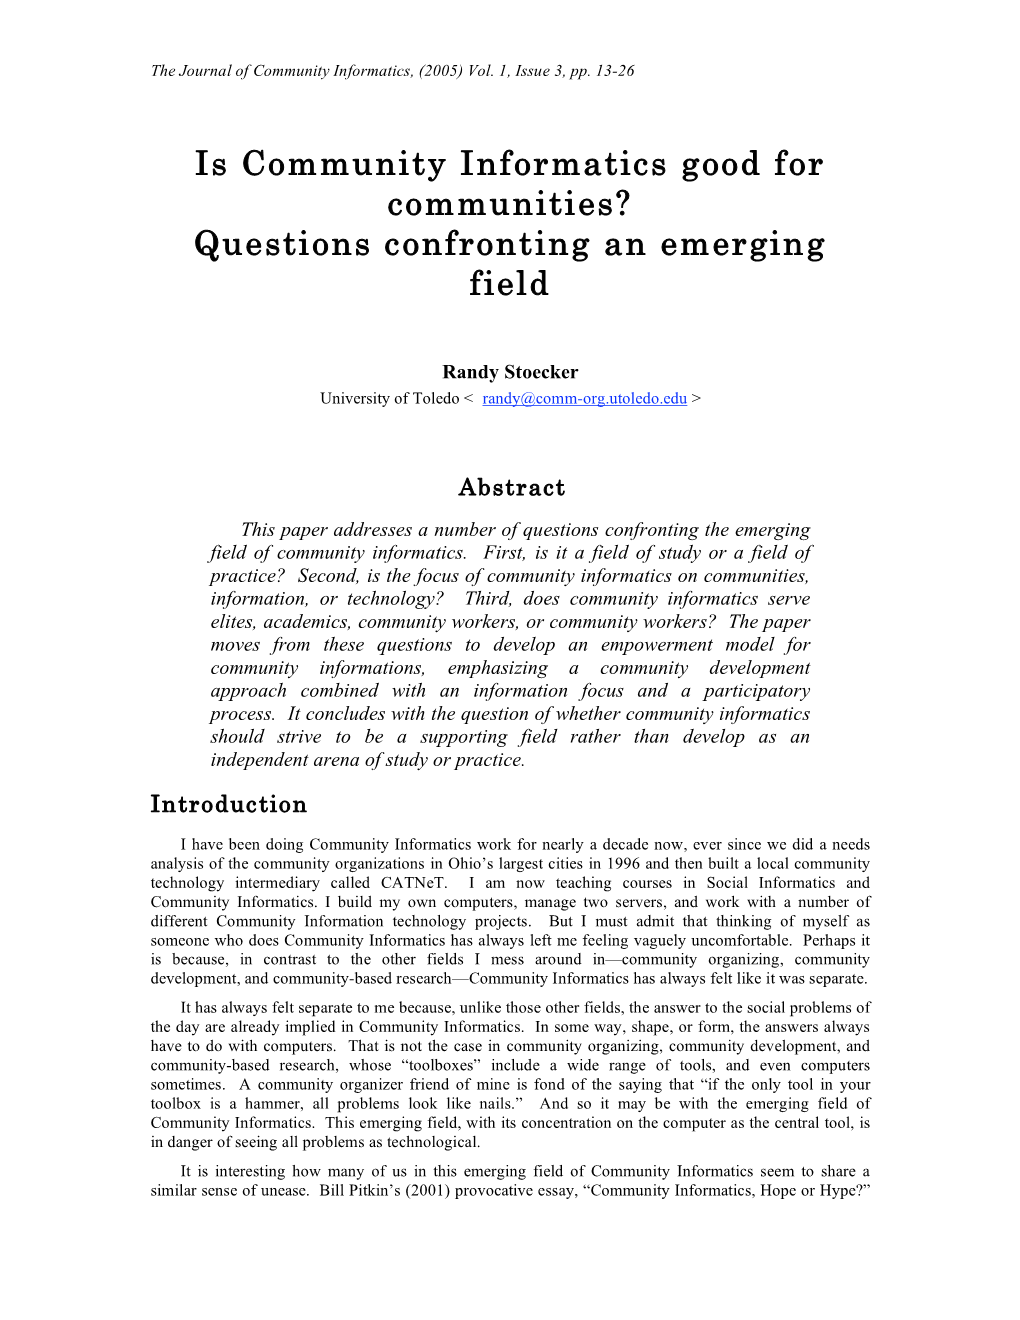 Is Community Informatics Good for Communities? Questions Confronting an Emerging Field